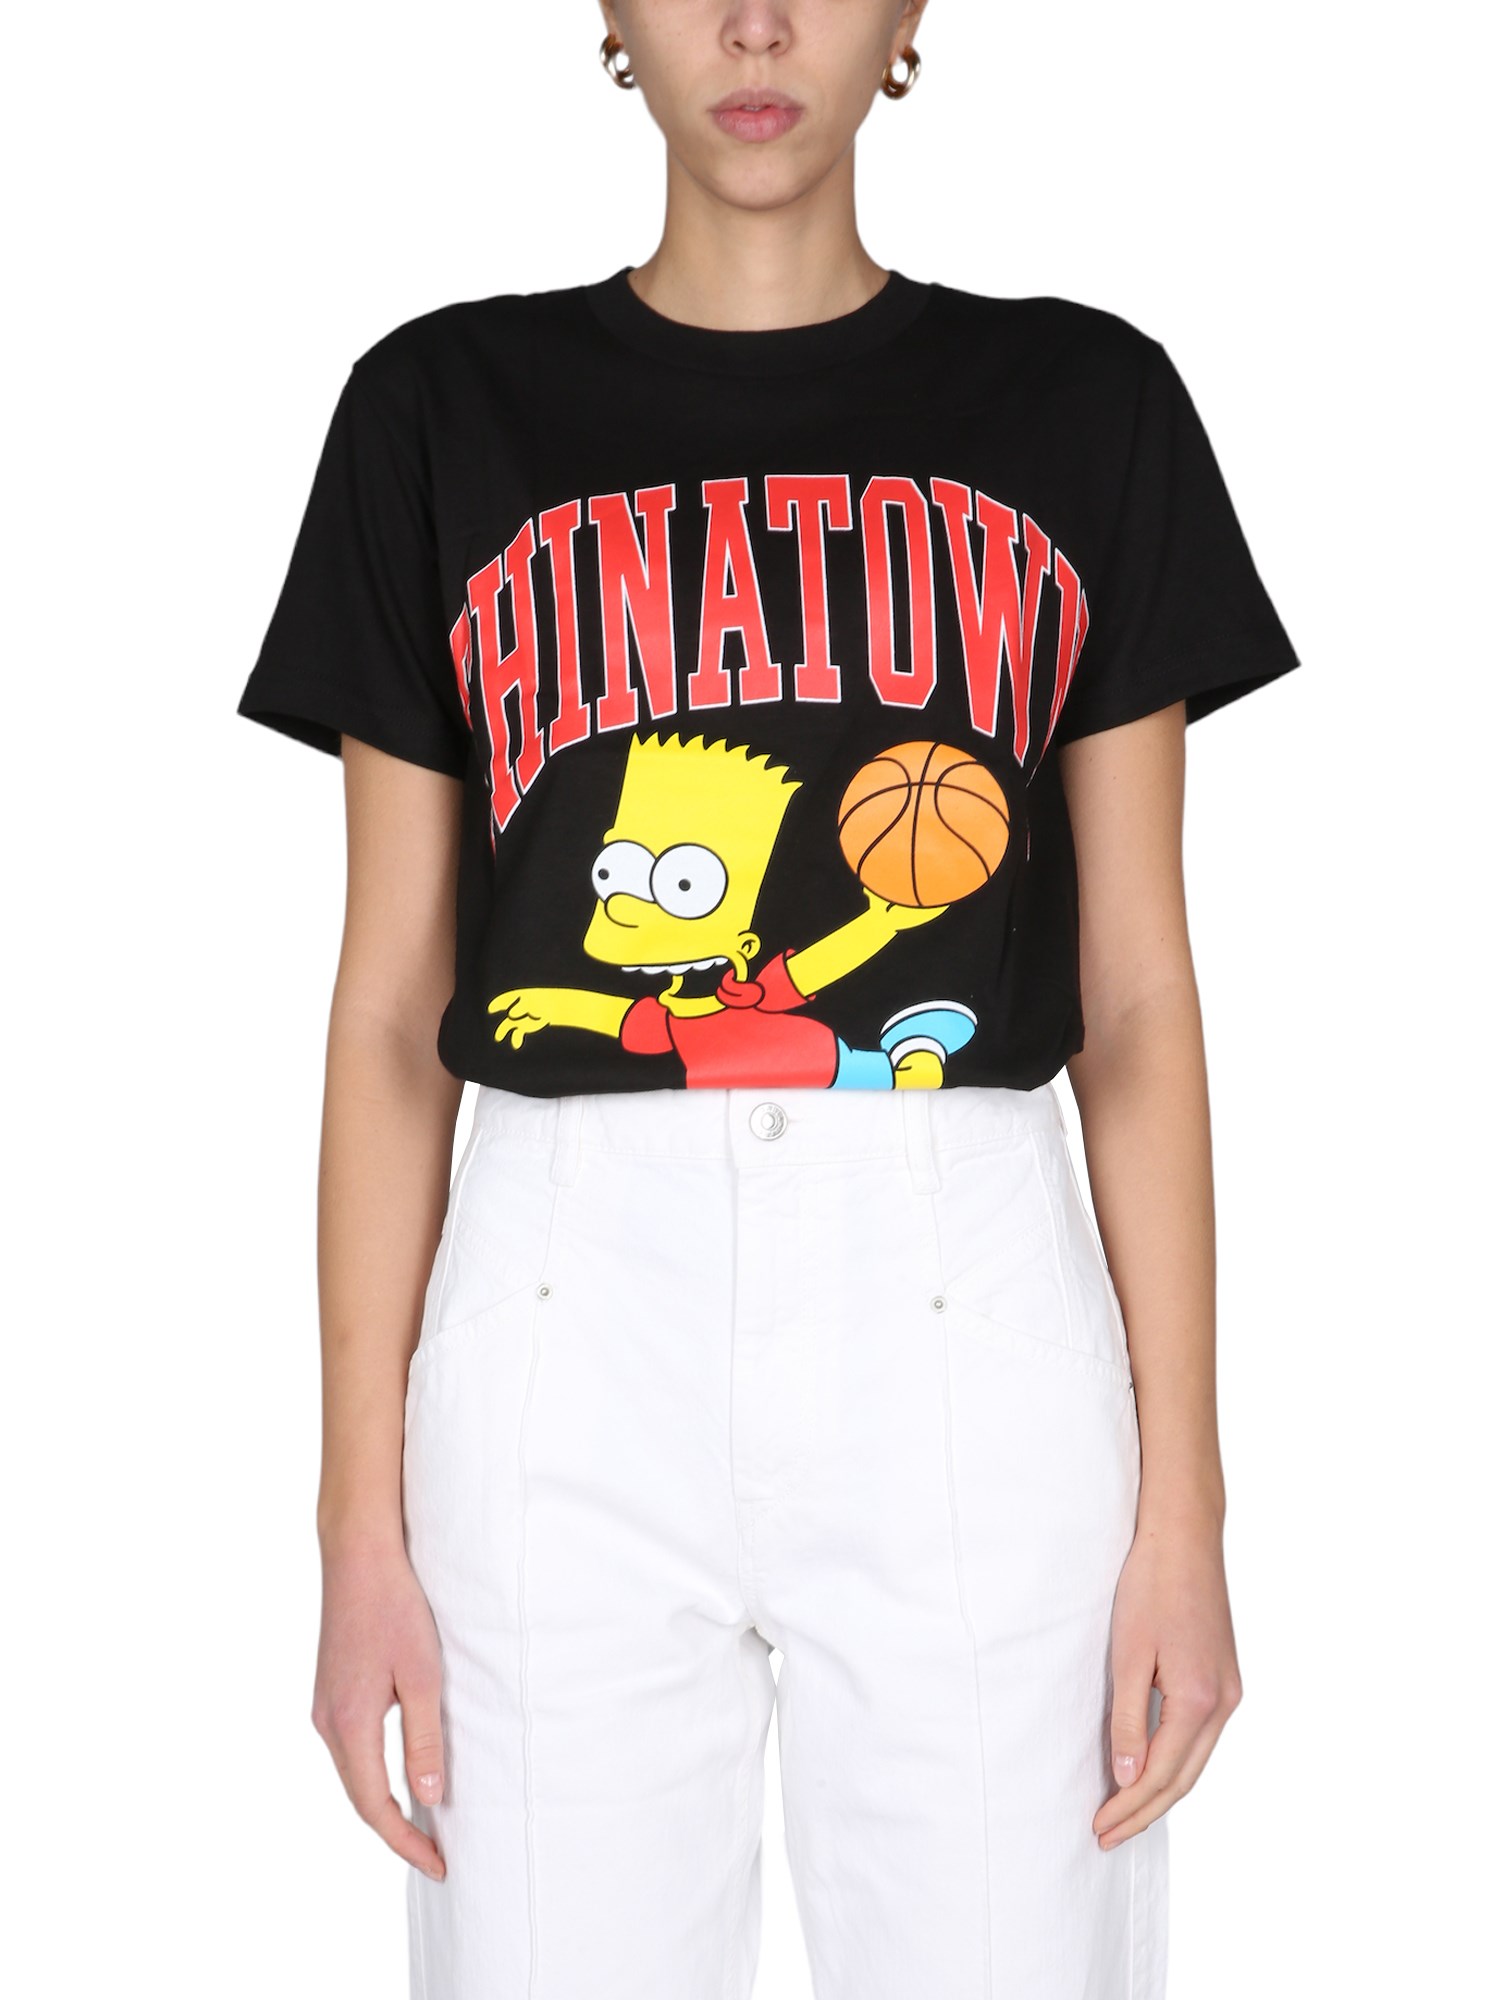 chinatown market x the simpsons chinatown market x the simpsons "air bart" t-shirt